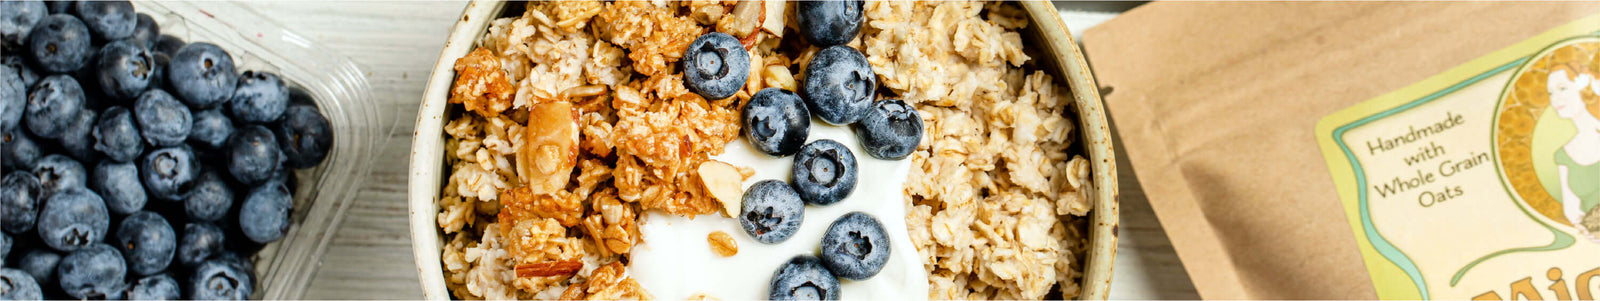 Bowl of granola with blueberries.